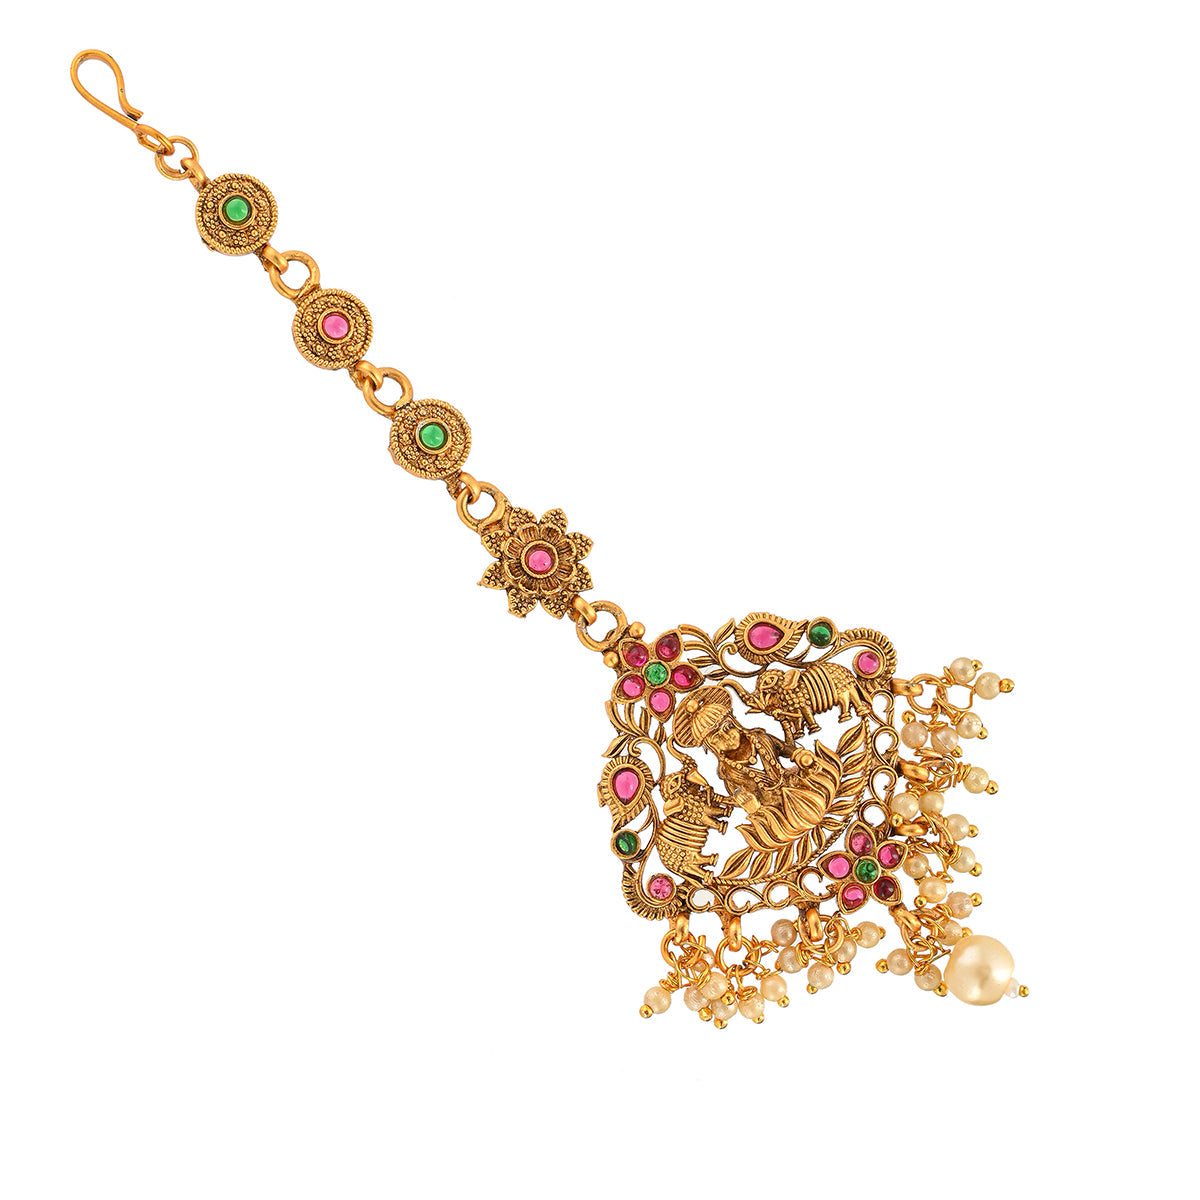 Women's Opulent Temple Design Brass Faux Pearls And Cz Adorned Gold Plated Maang Tika - Voylla